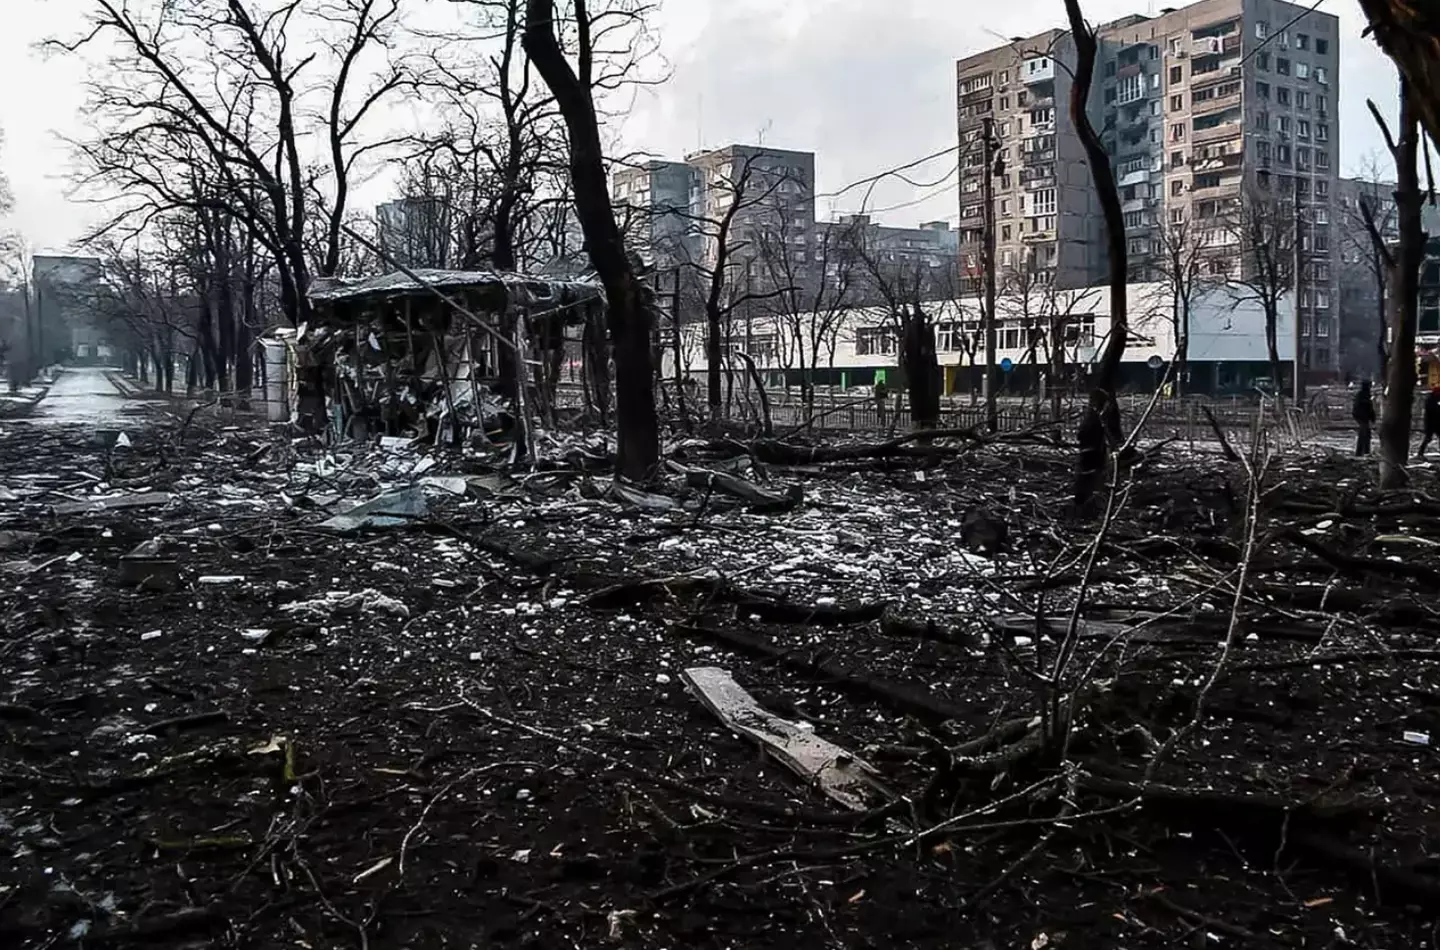 Mariupol in southern Ukraine has been hit by Russian forces.